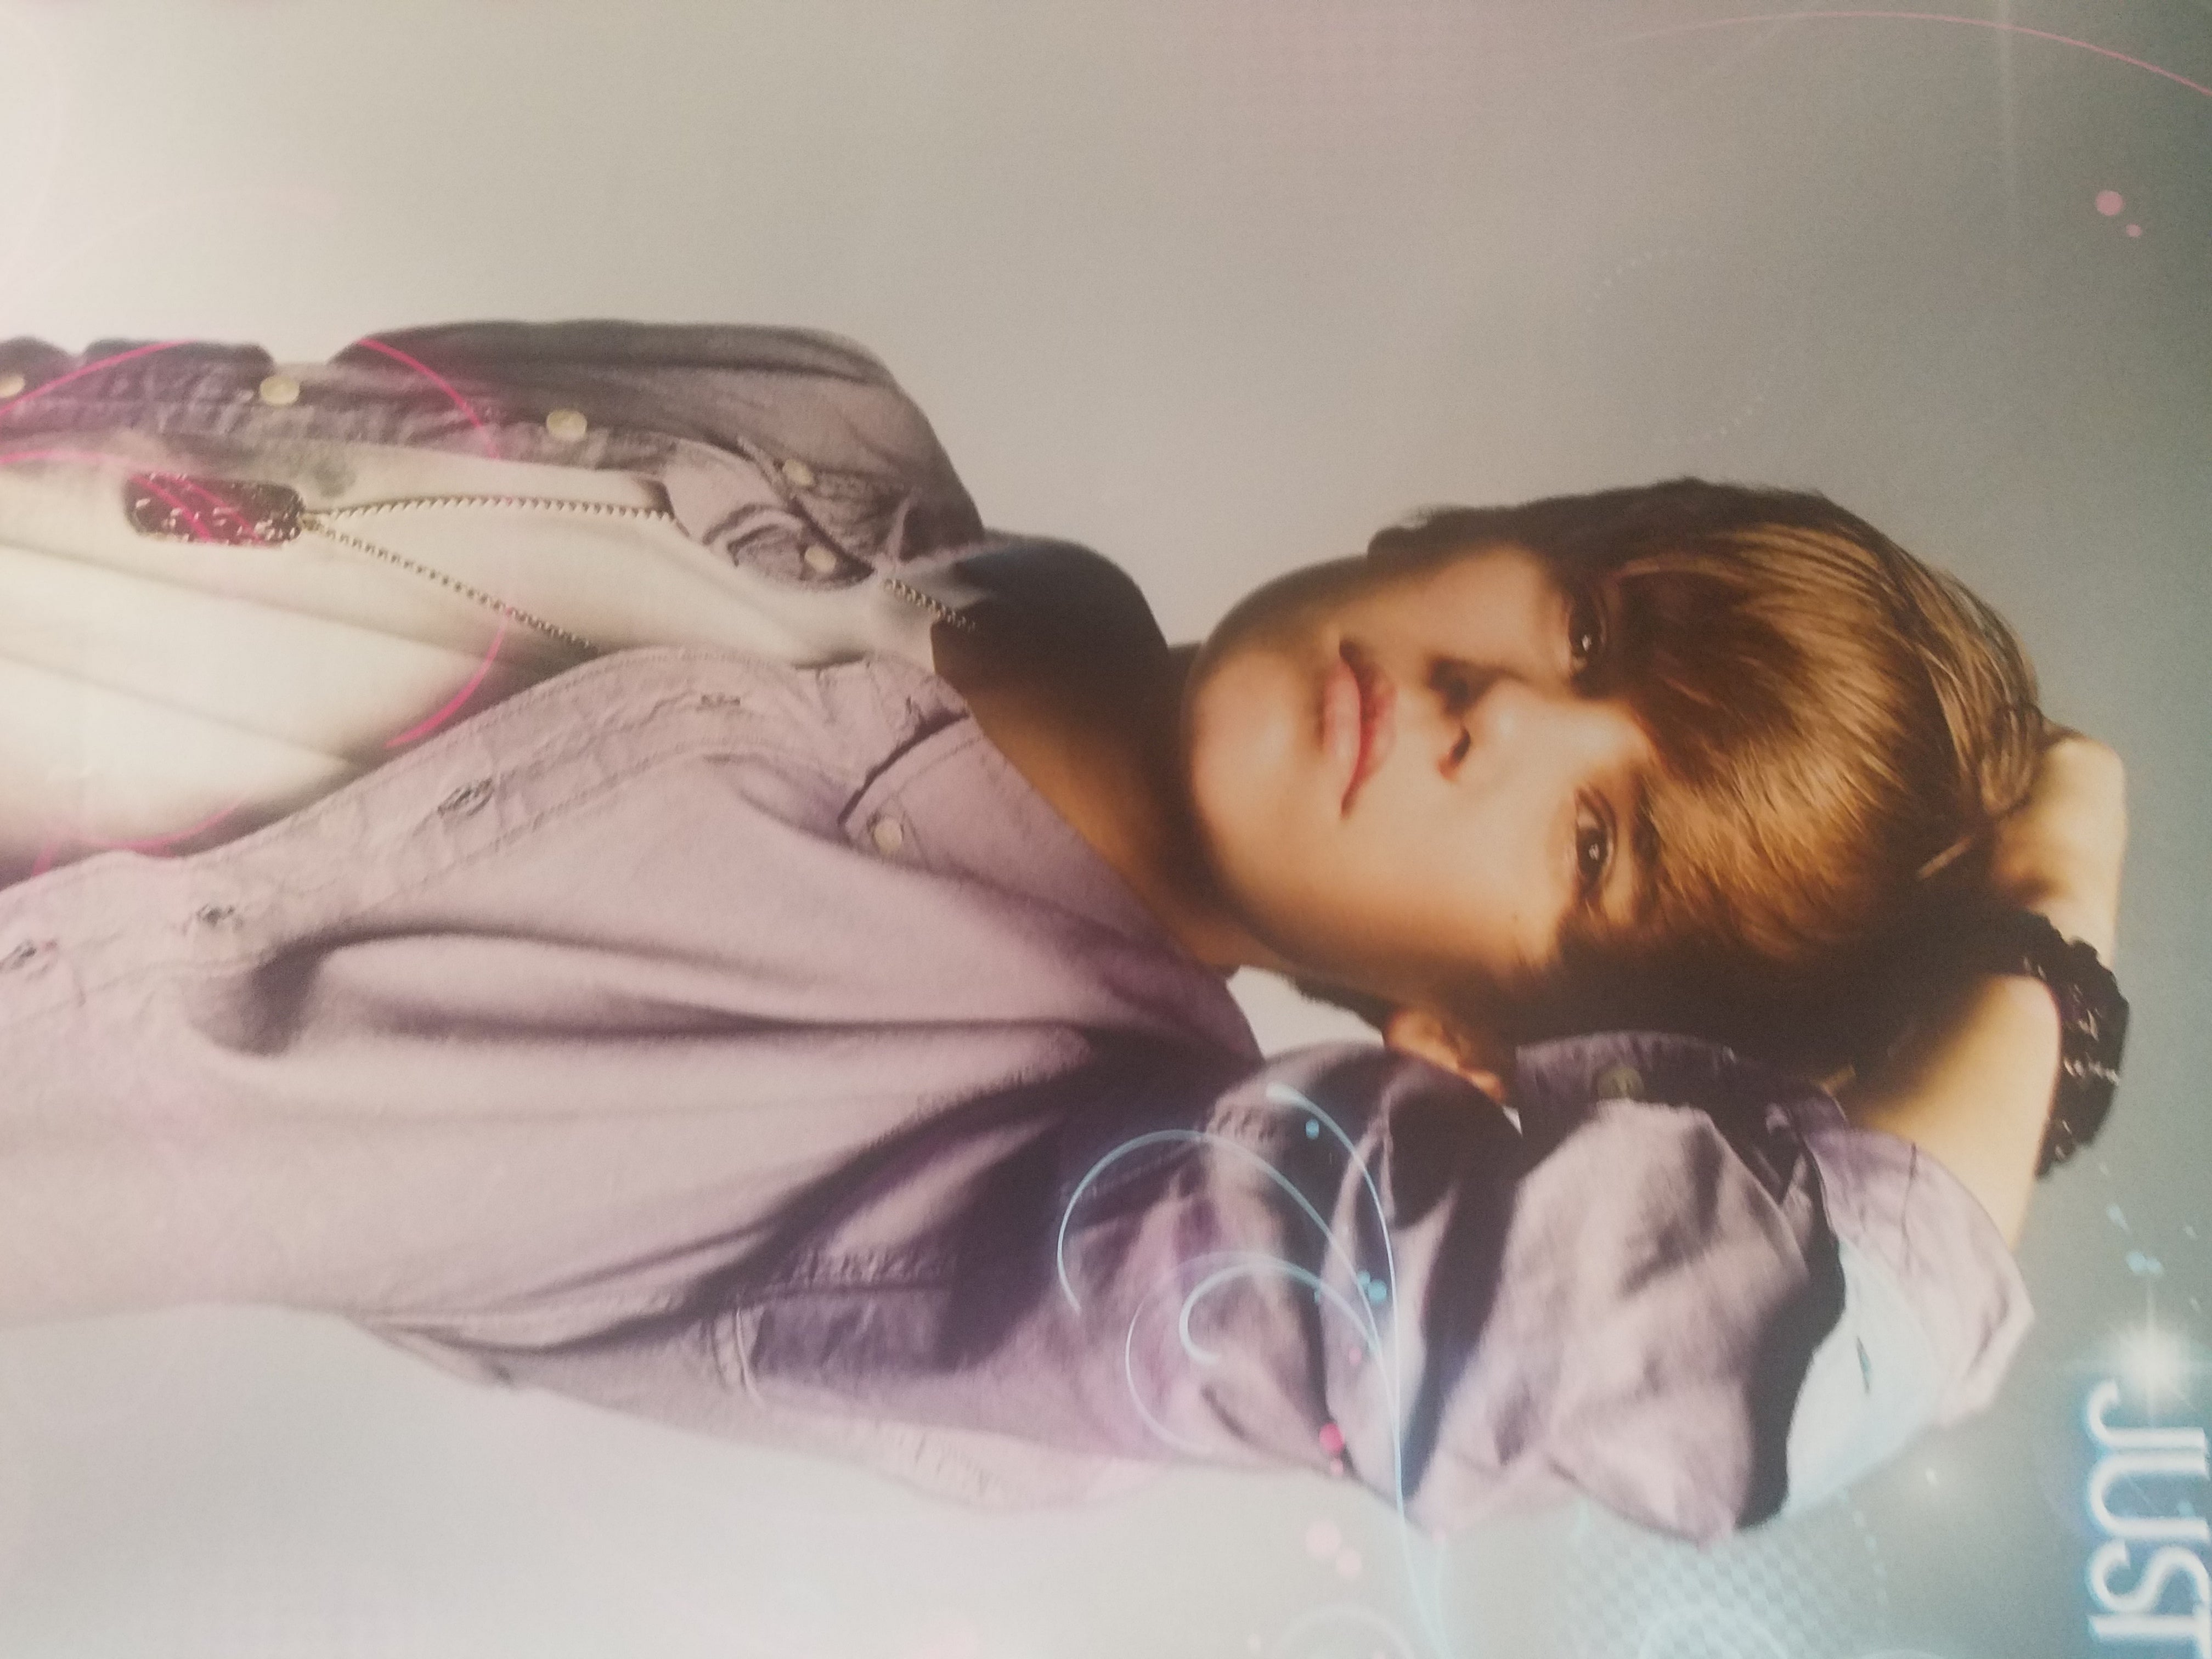 "Bieber Fever 2010."  This poster was included with Justin Bieber's 2010 Fan Club package.  This listing is for the poster only.